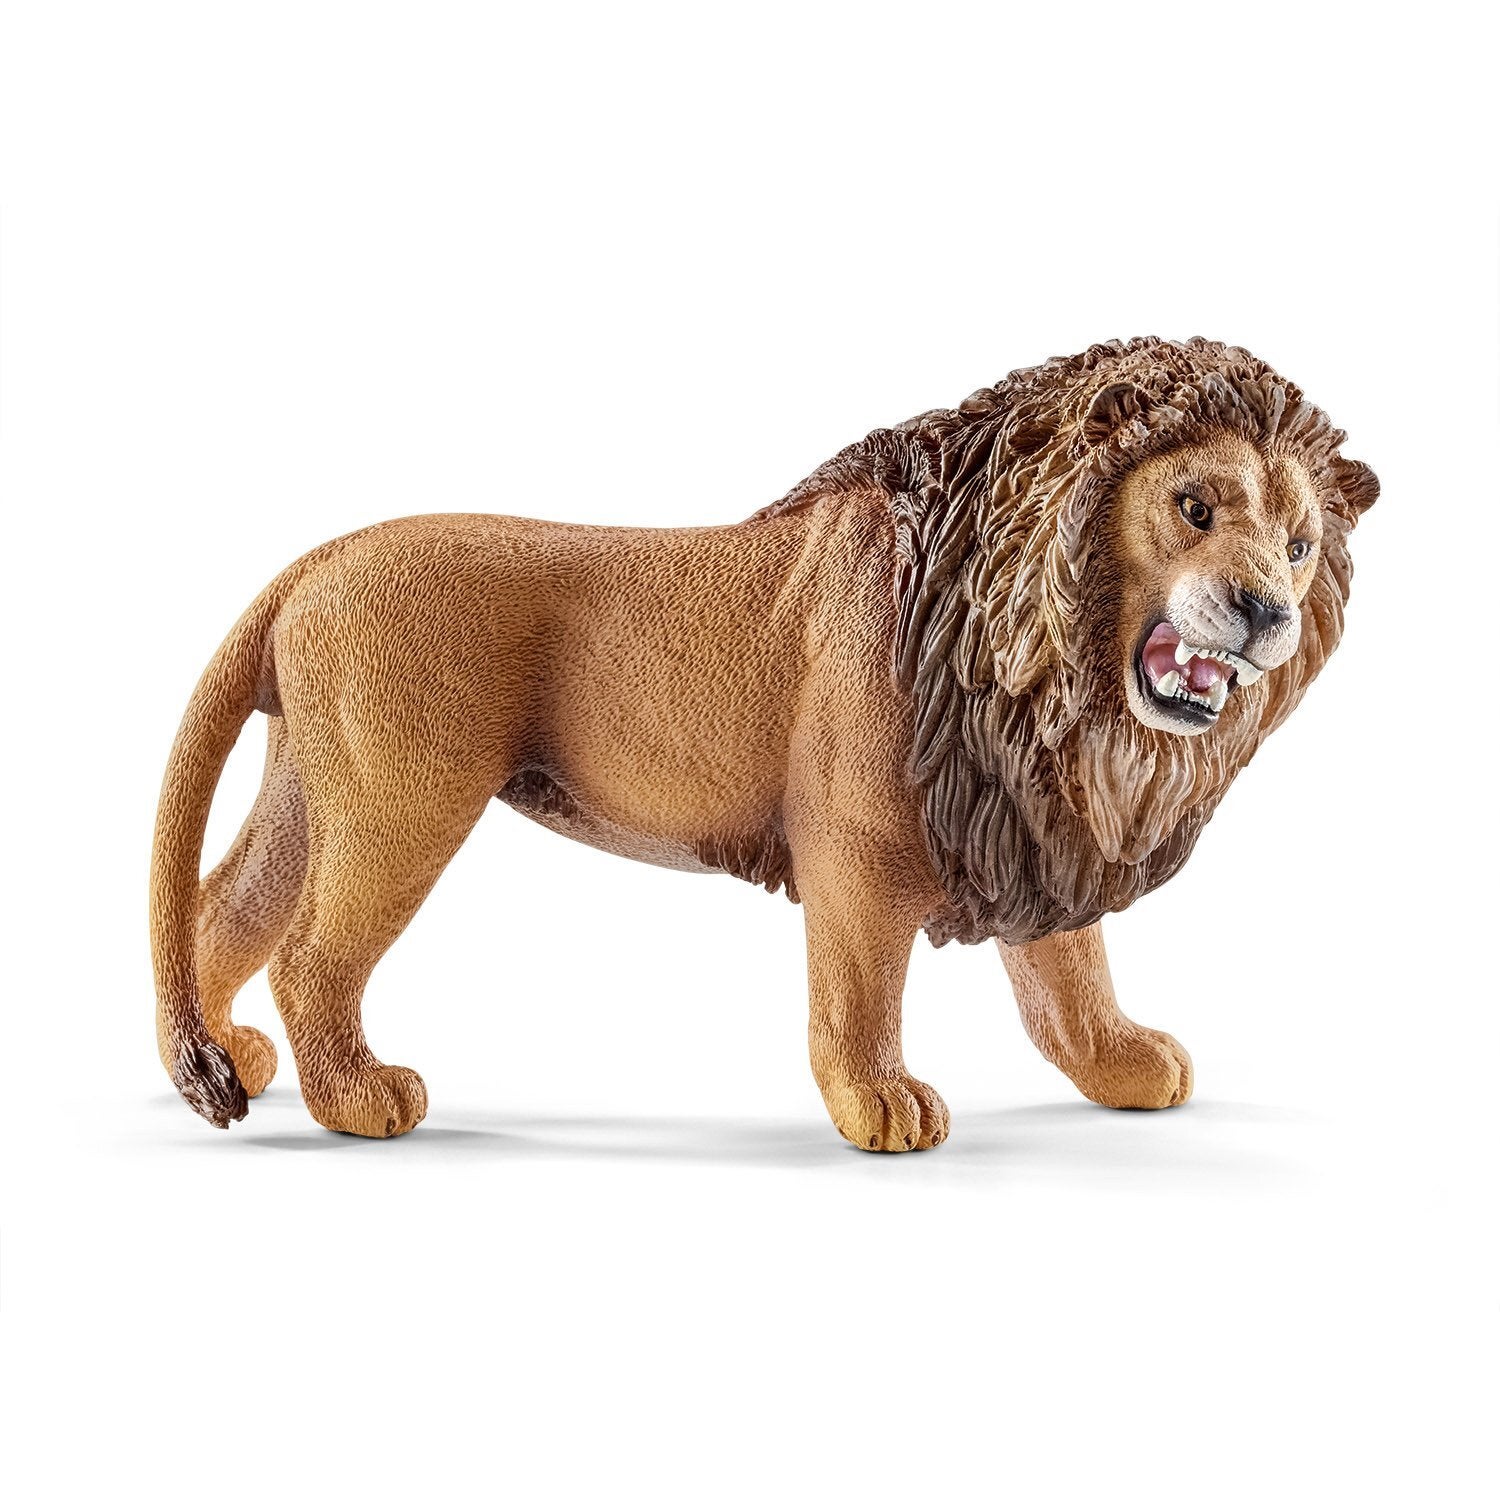 SCHLEICH 14726 Wild Life Lion  The Realm of Toys & the Nerd Room